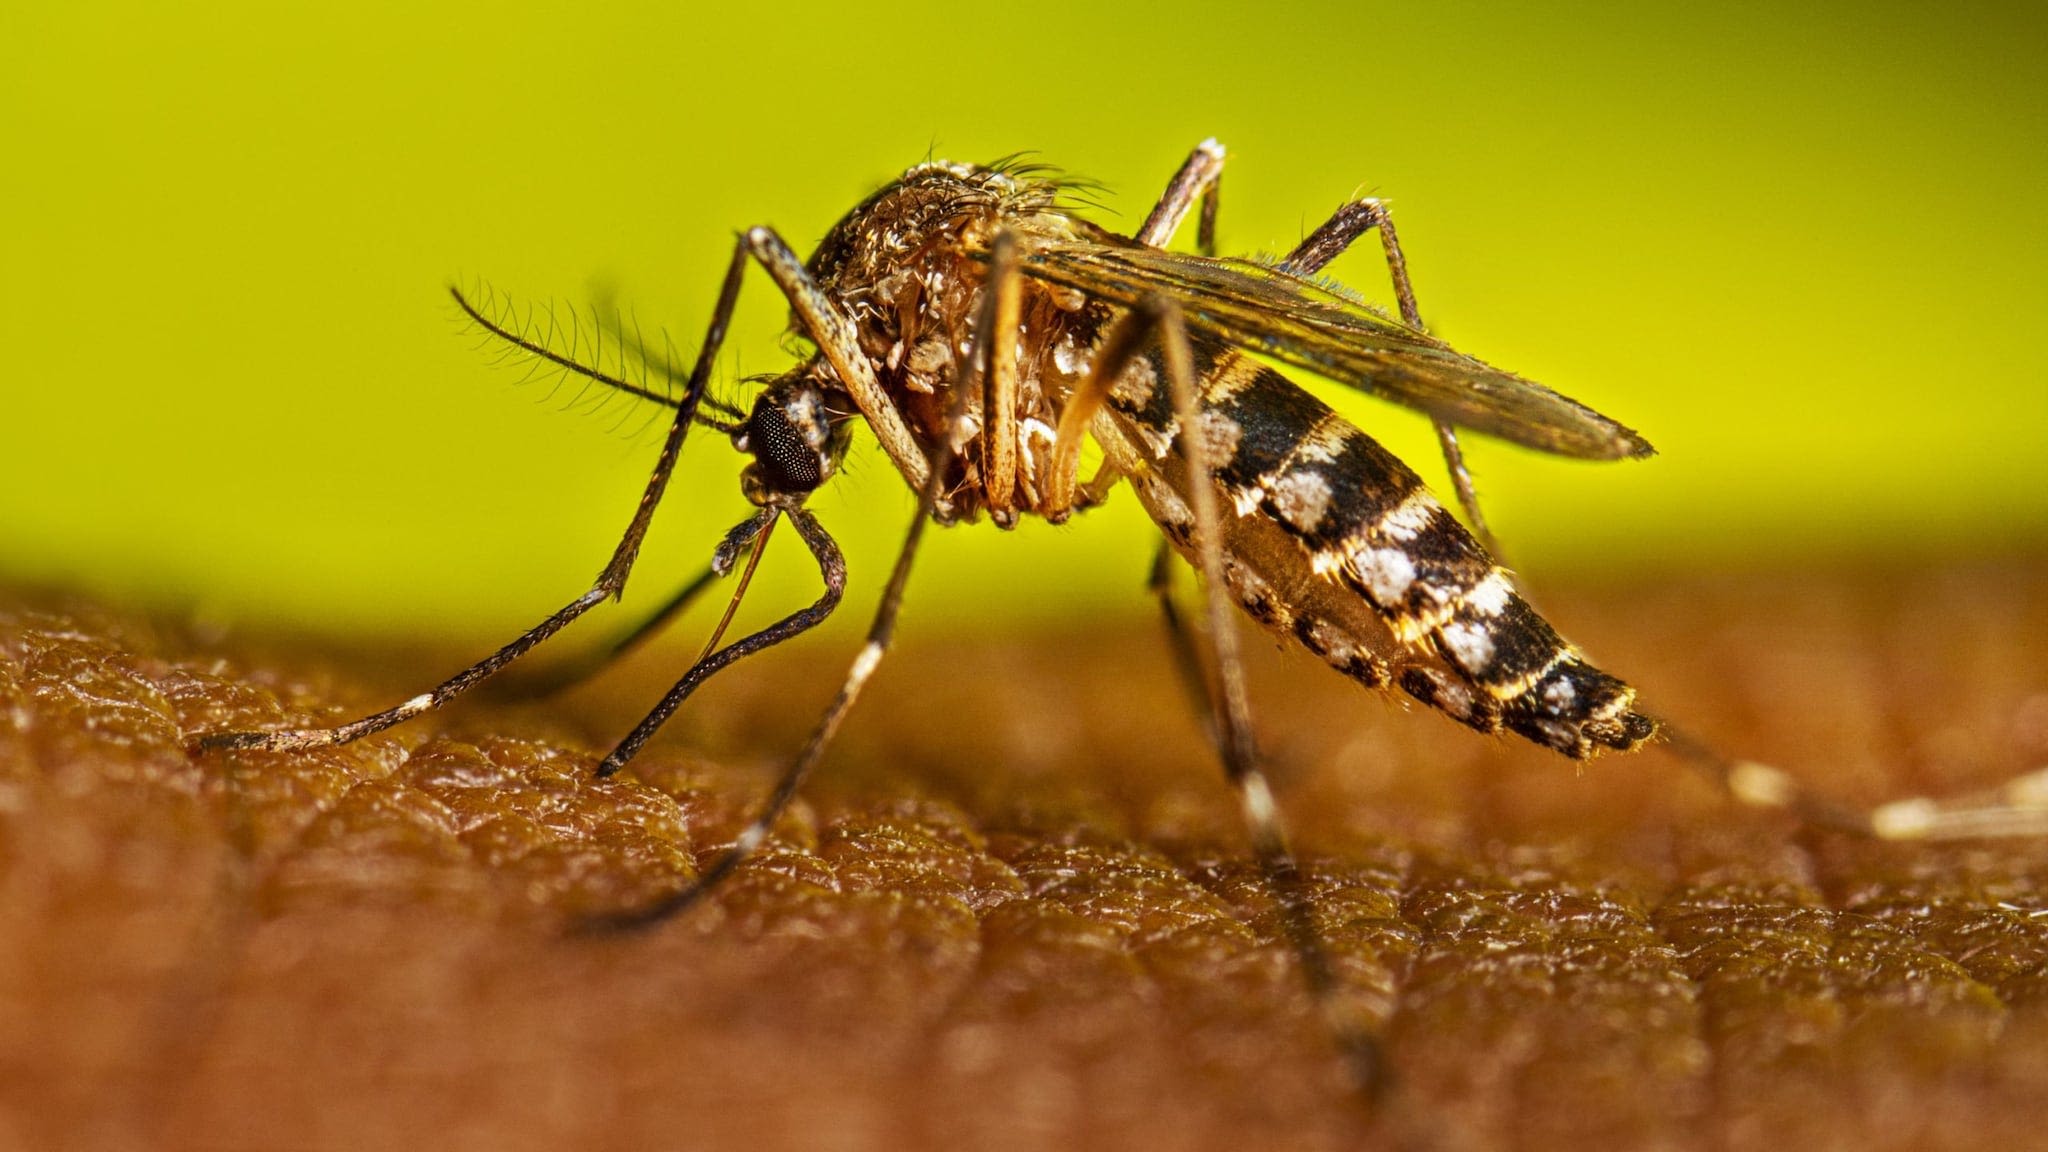 Mosquitoes always seem to bite you? Here's why and how to avoid them